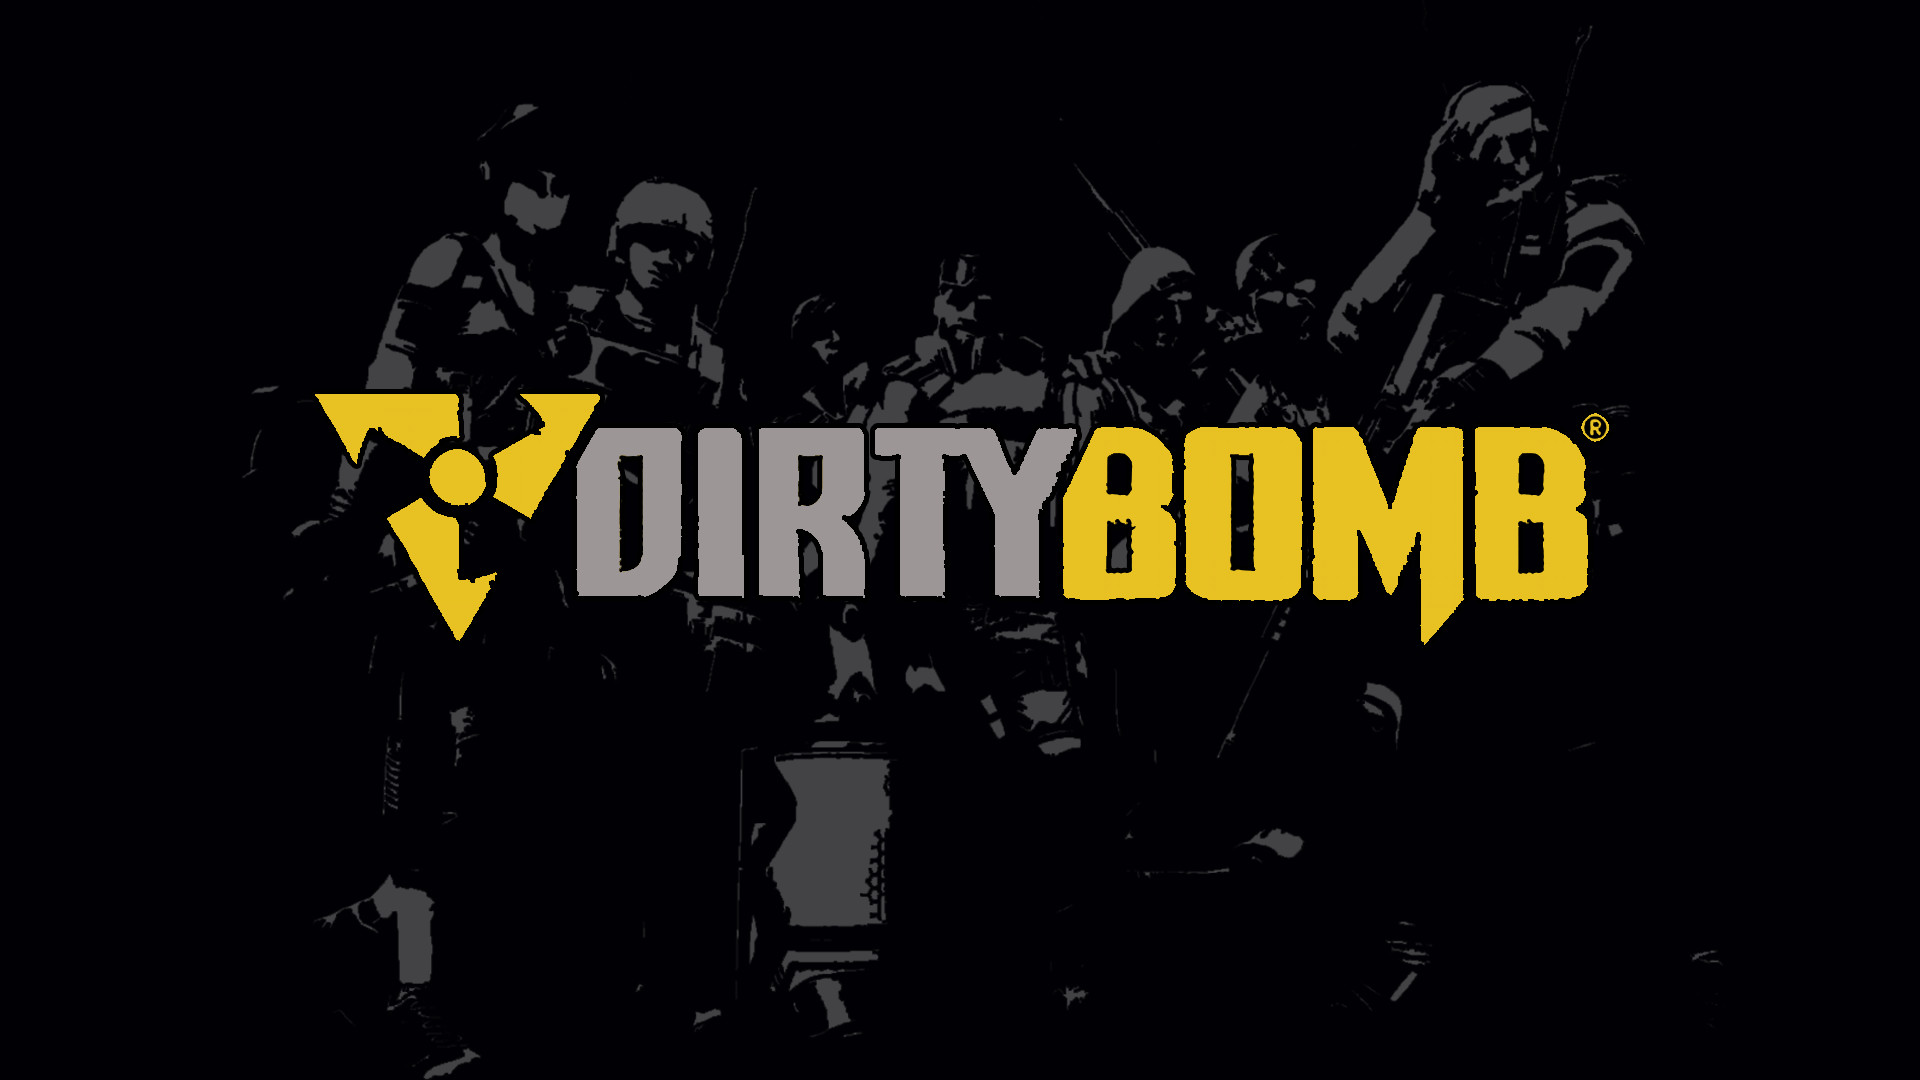 1920x1080 High Quality Images of Dirty in Awesome Collection, BsnSCB .